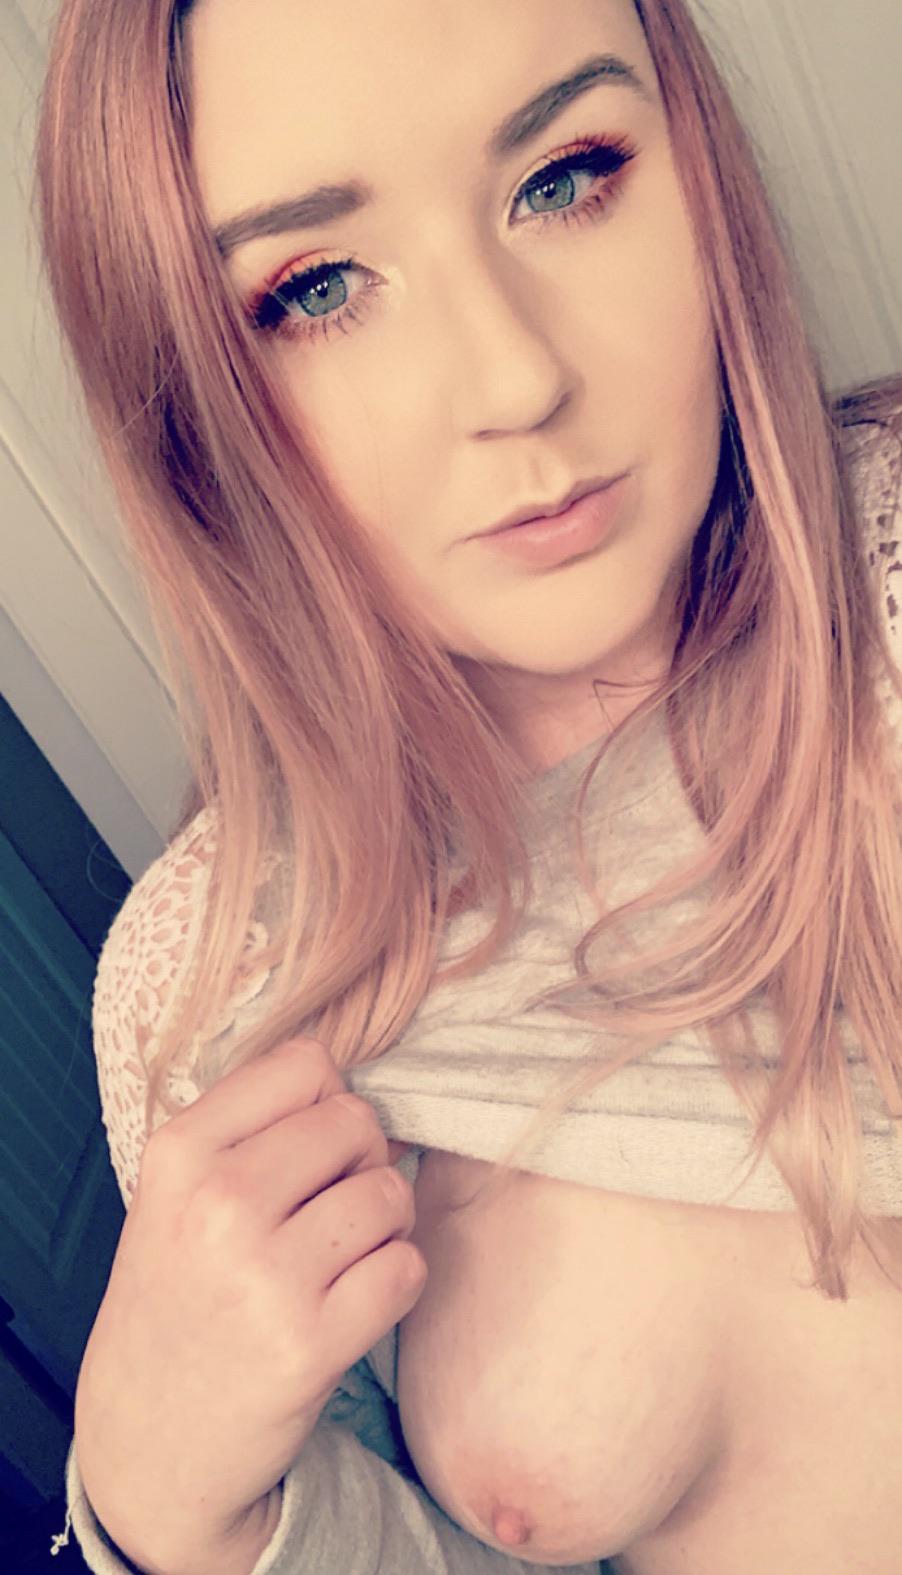 So excited to start posting here! Hello everyone!